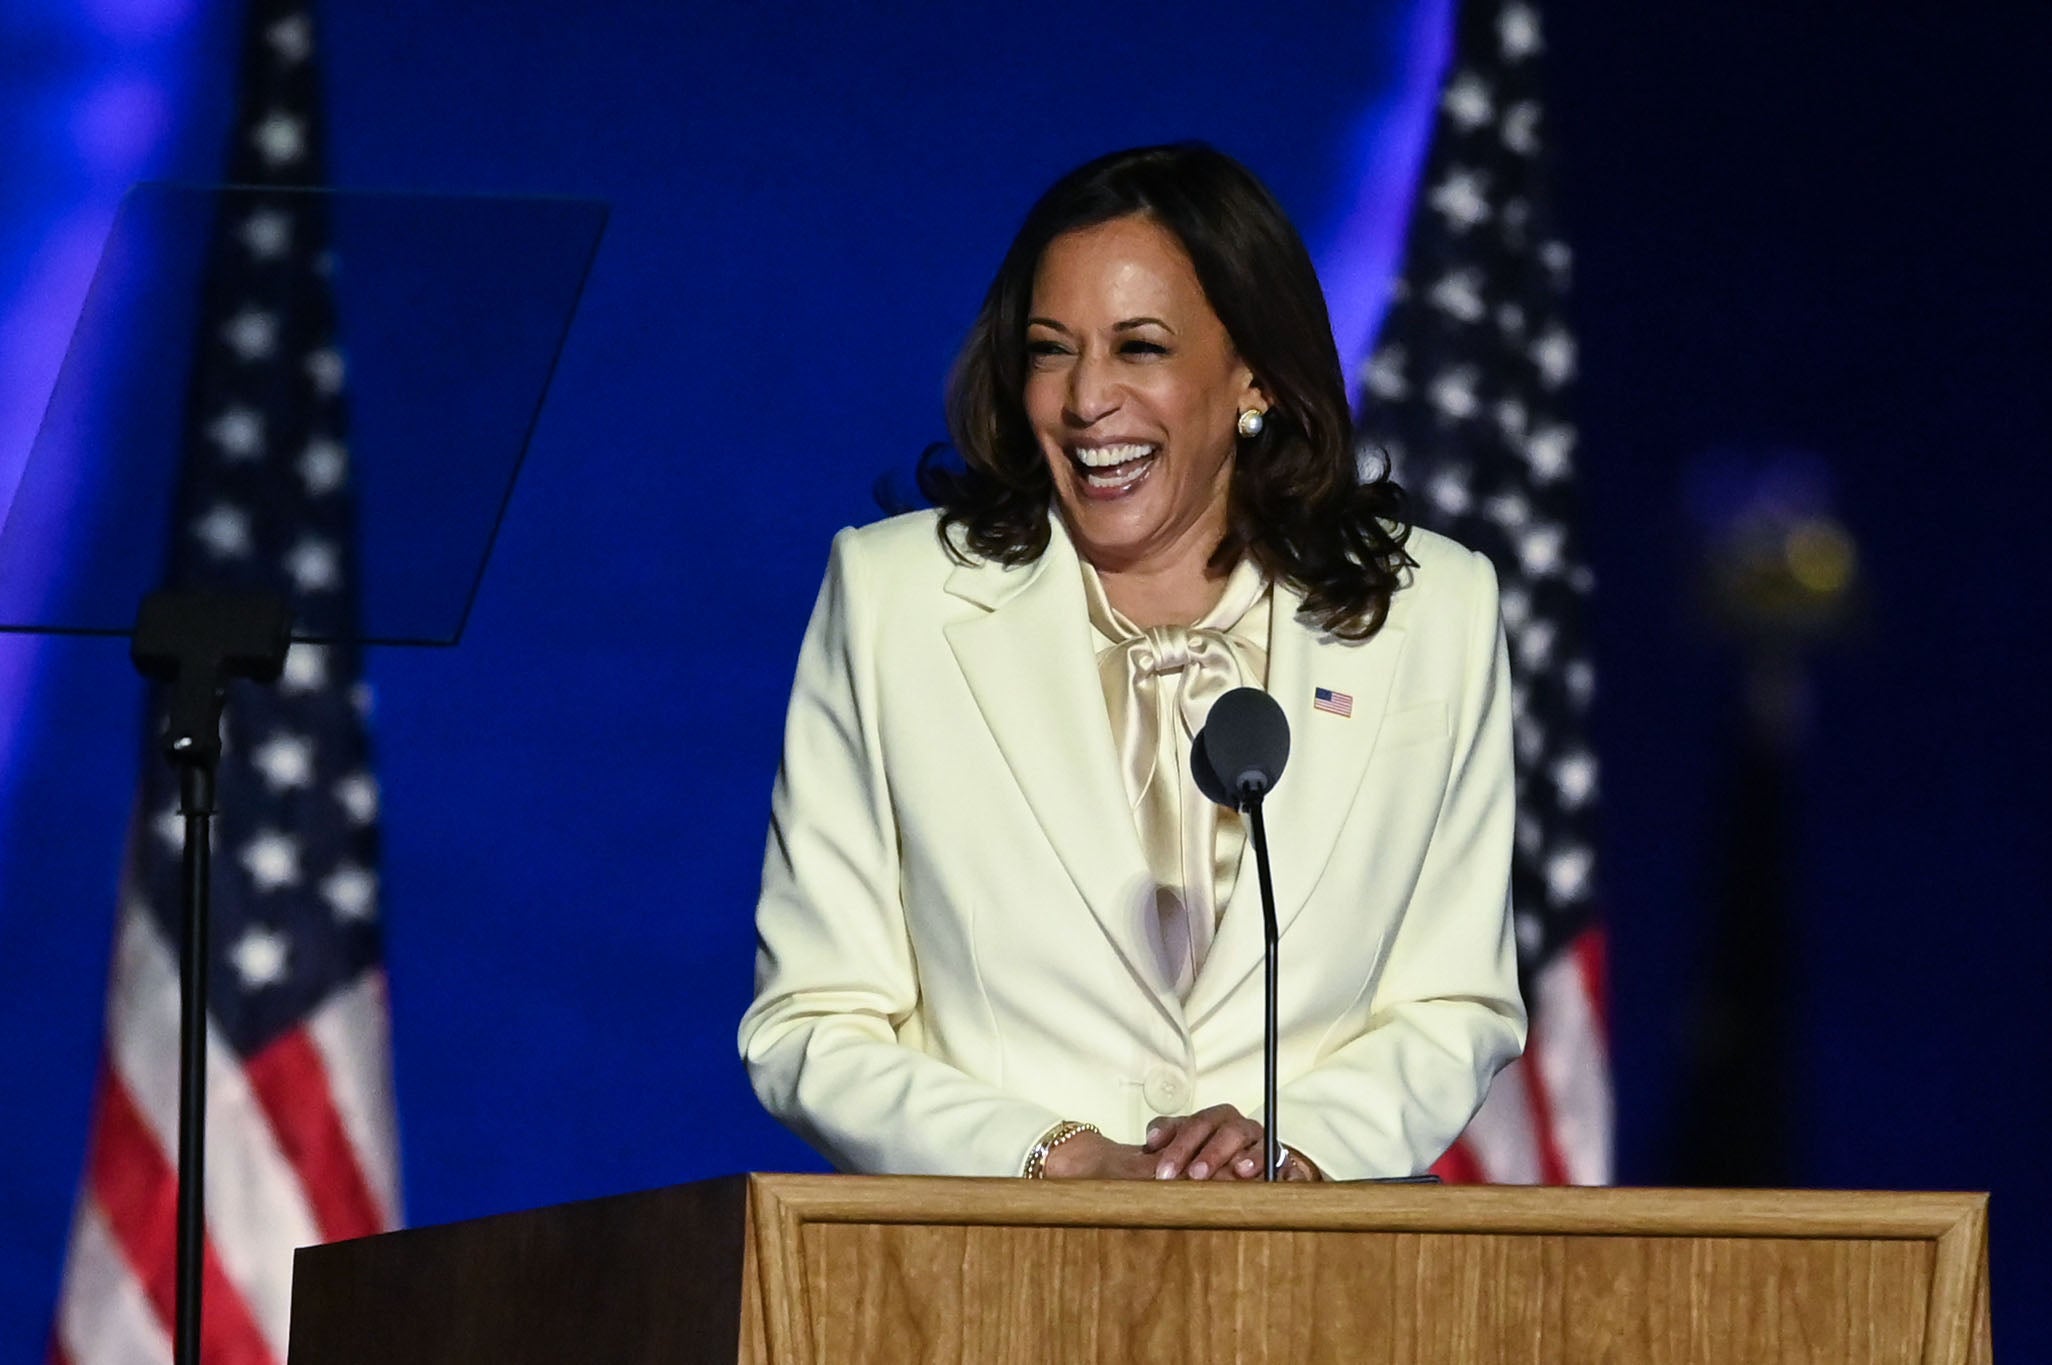 Harris in her white Carolina Herrera suit while addressing the nation from the Chase Center in Delaware in November, 2020